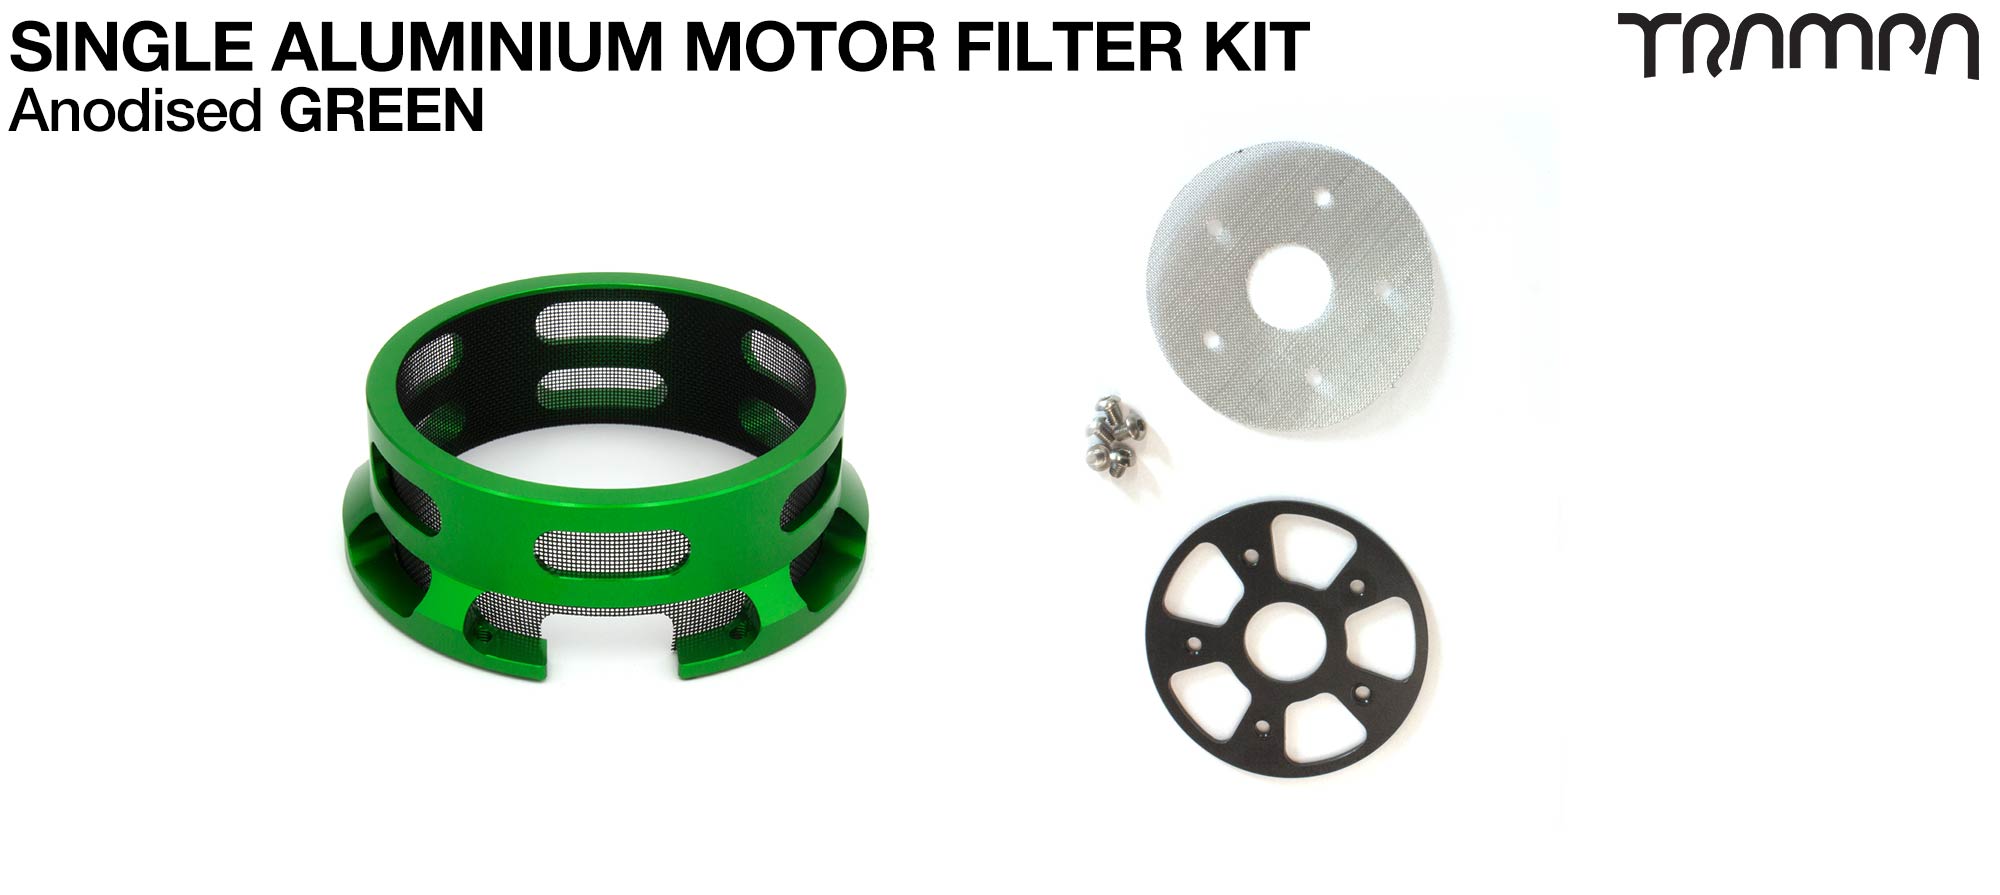 14FiFties HALF CAGE Motor protection - GREEN anodised with Filter & Fan - SINGLE